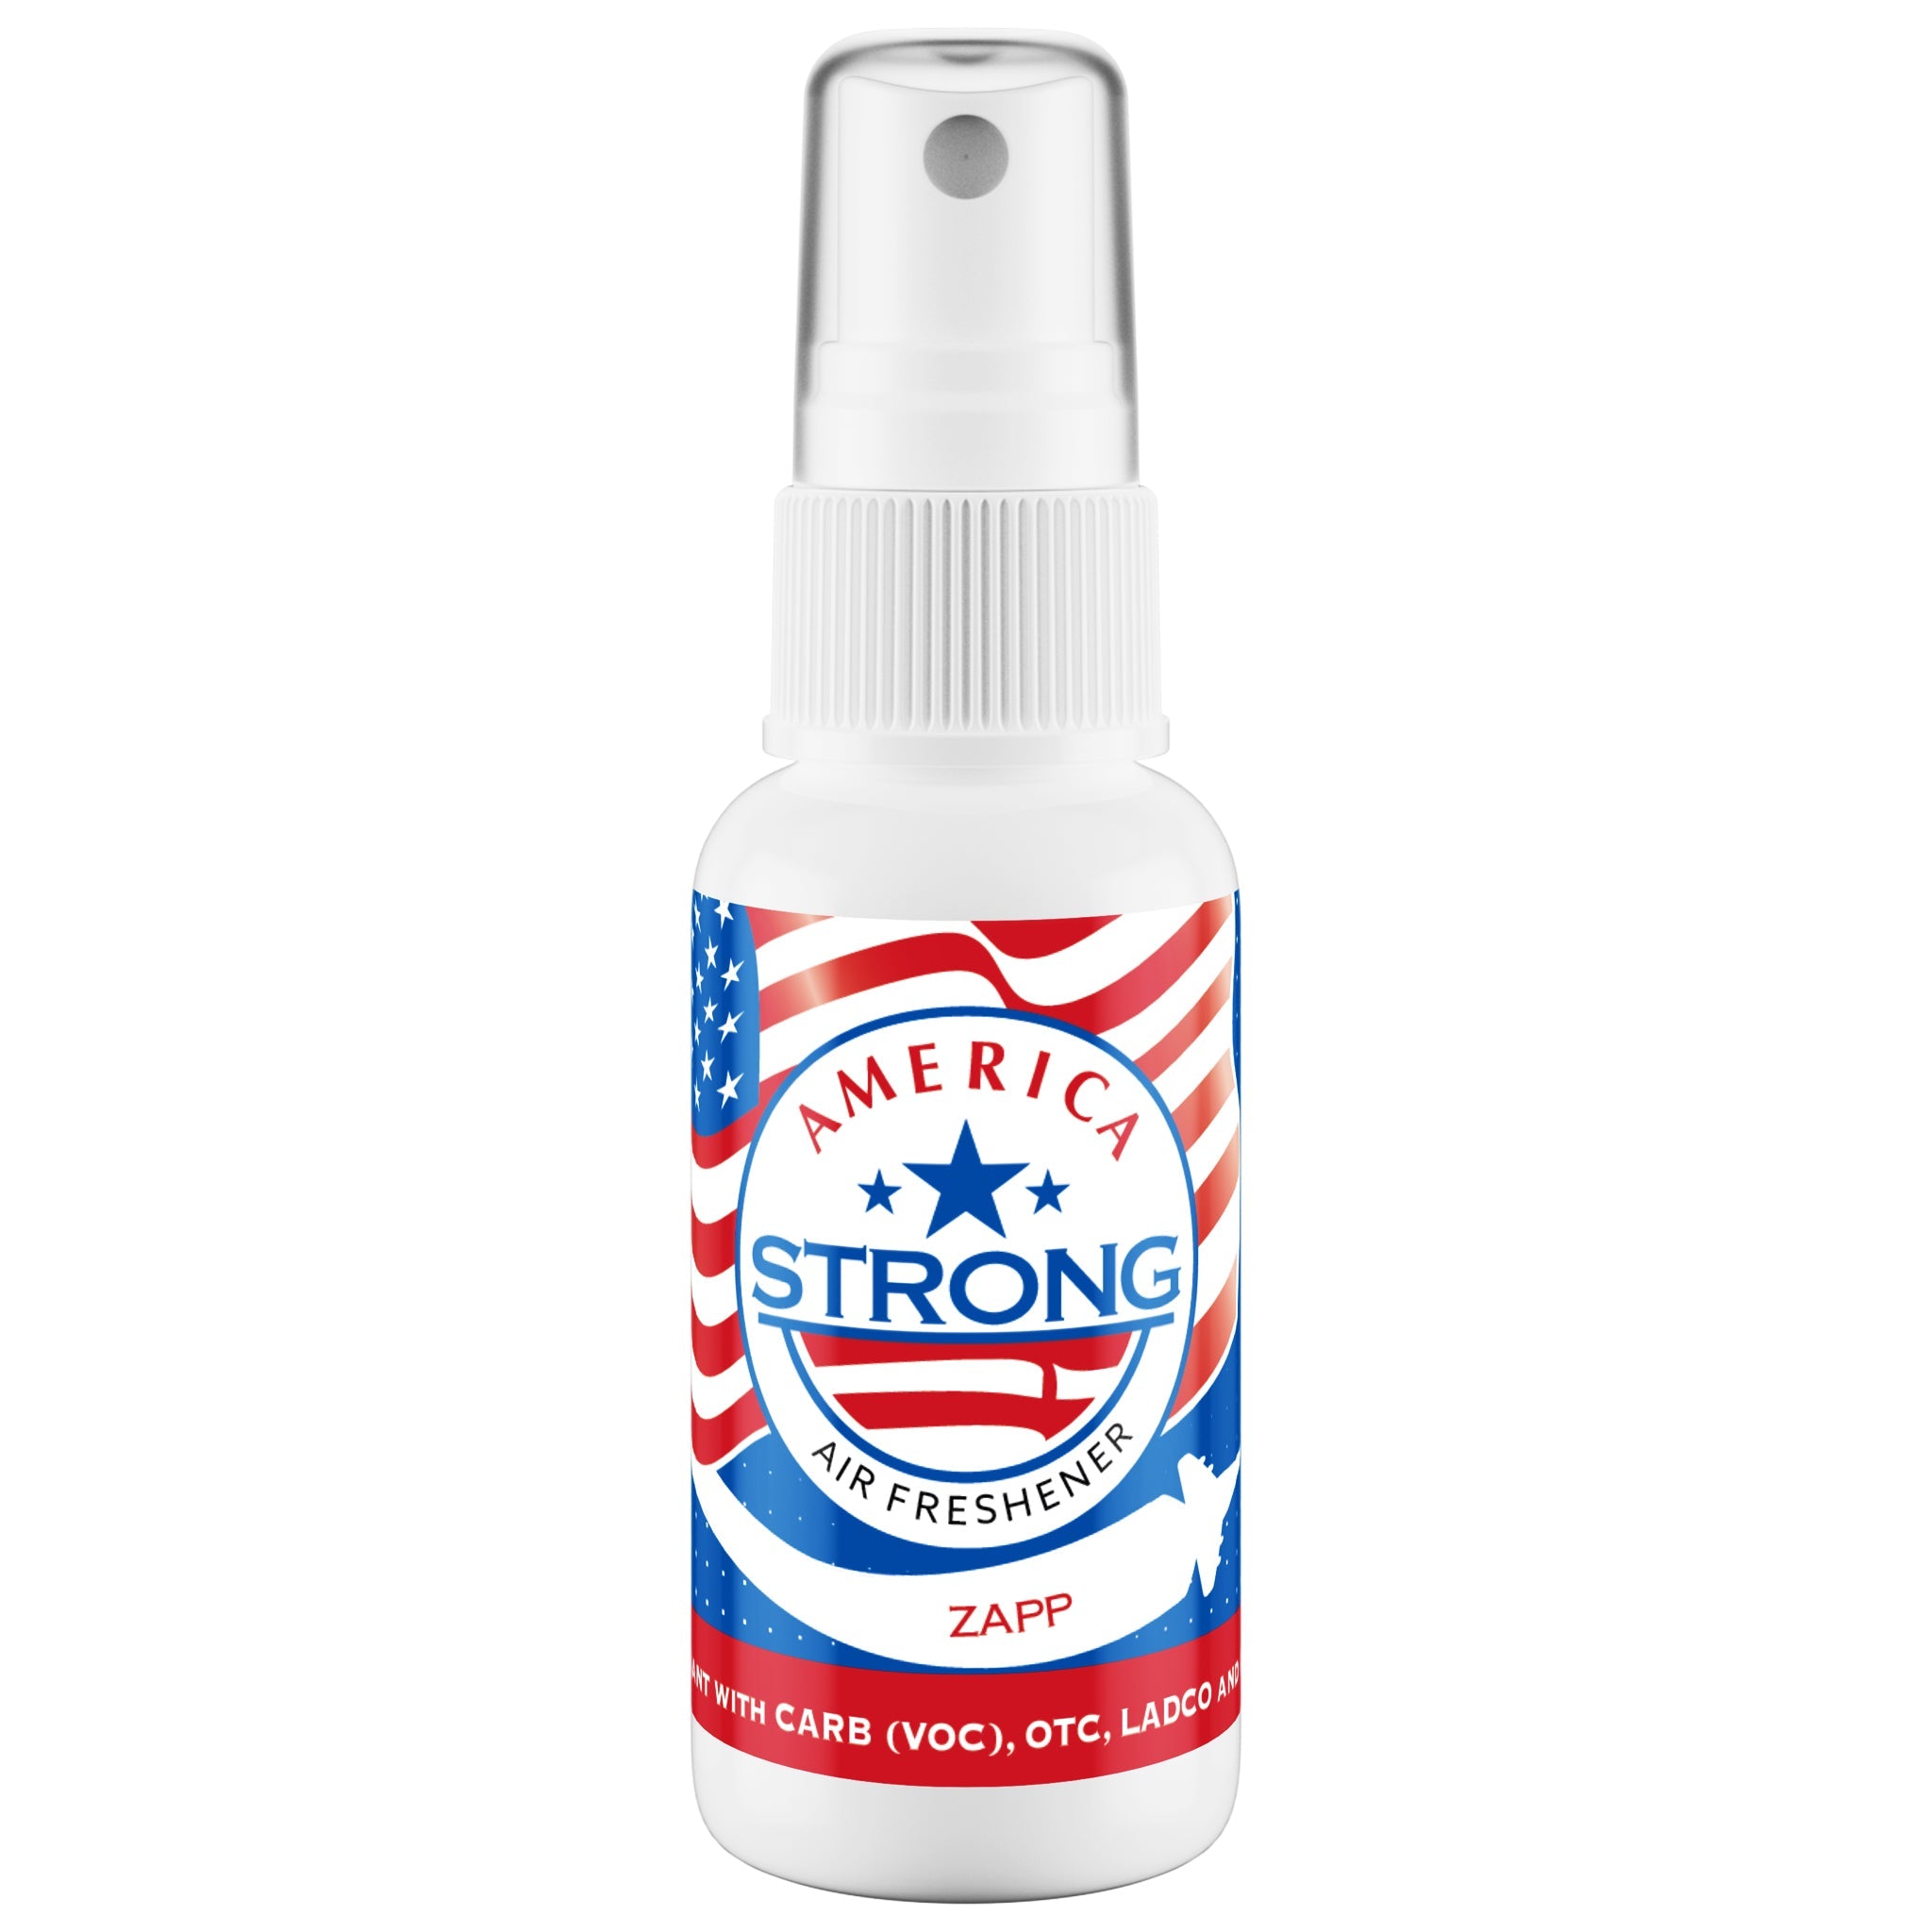 America Strong Air Freshener - Zapp Scent